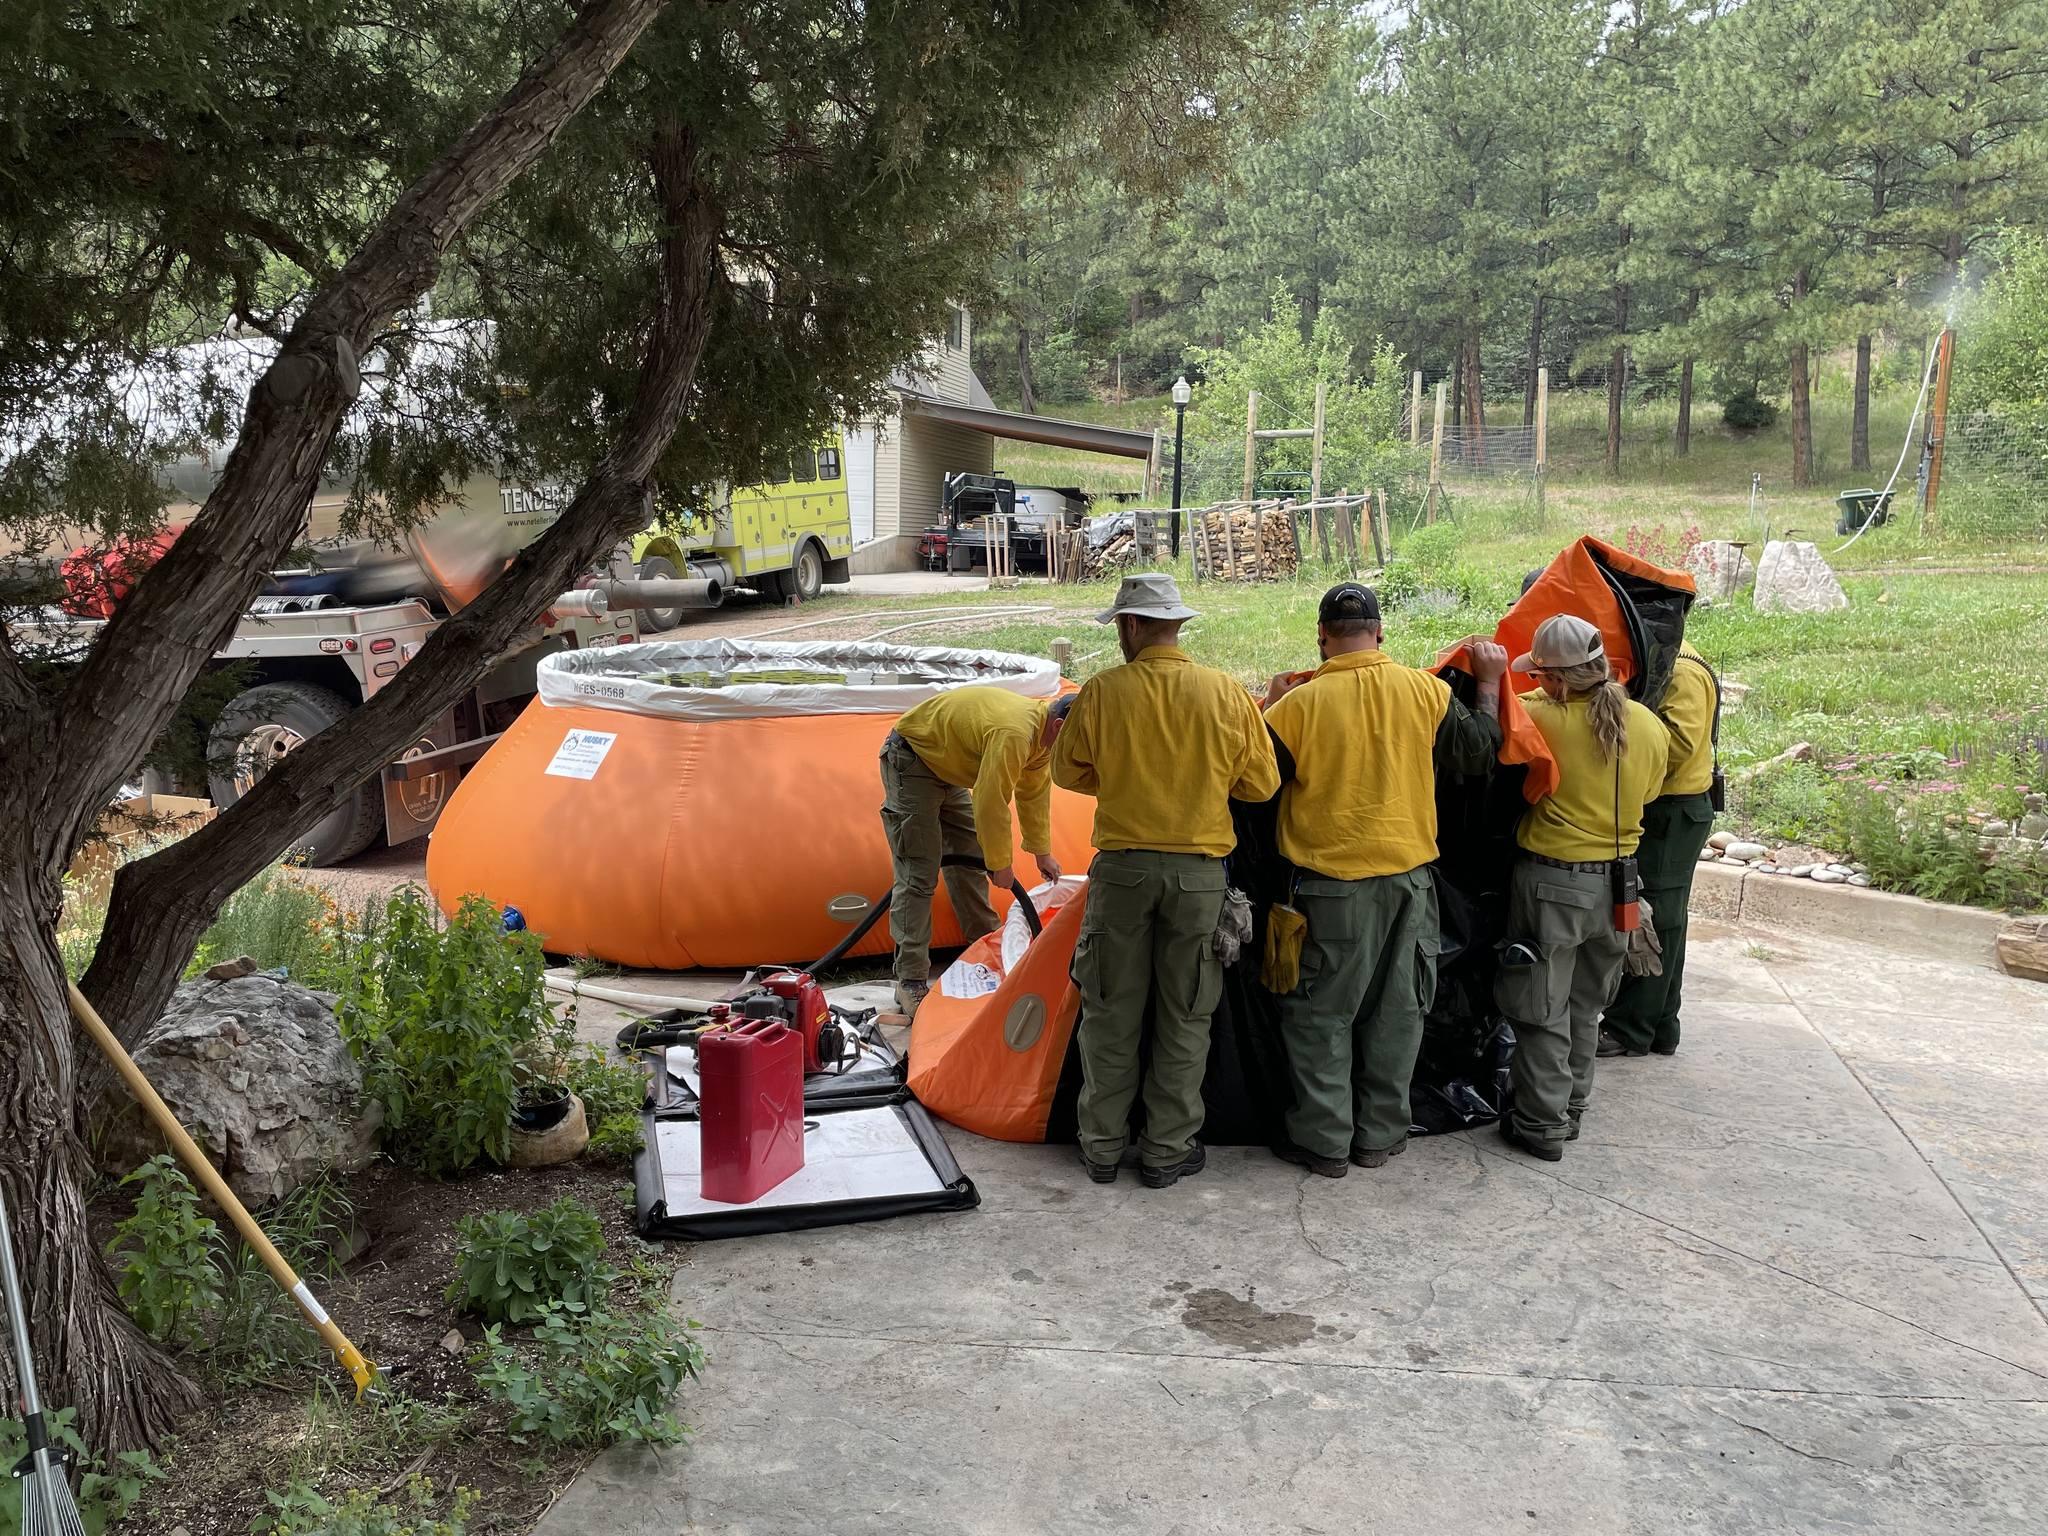 One orange water tank filled with water is towards the back of the photo. In the front of the photo, 5 firefighters are working to fill a new orange water tank.